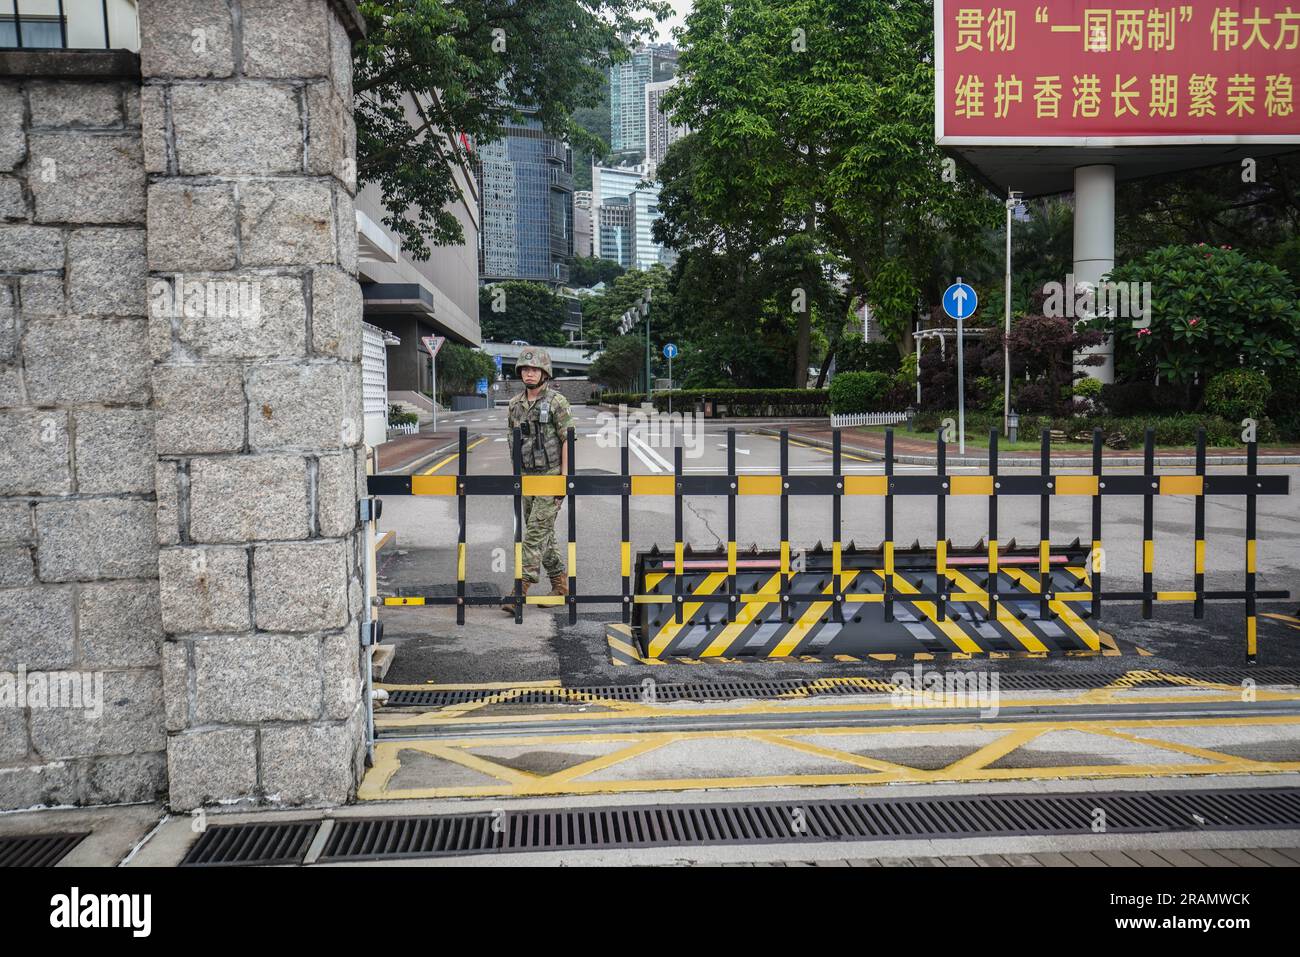 A soldier stands on guard at the entrance gate of the Chinese People's Liberation Army Forces Hong Kong Building in Hong Kong. The Central Barracks Amethyst Block is one of the barracks of Chinese People's Liberation Army basement, it is located next to the Central Government Offices. Stock Photo